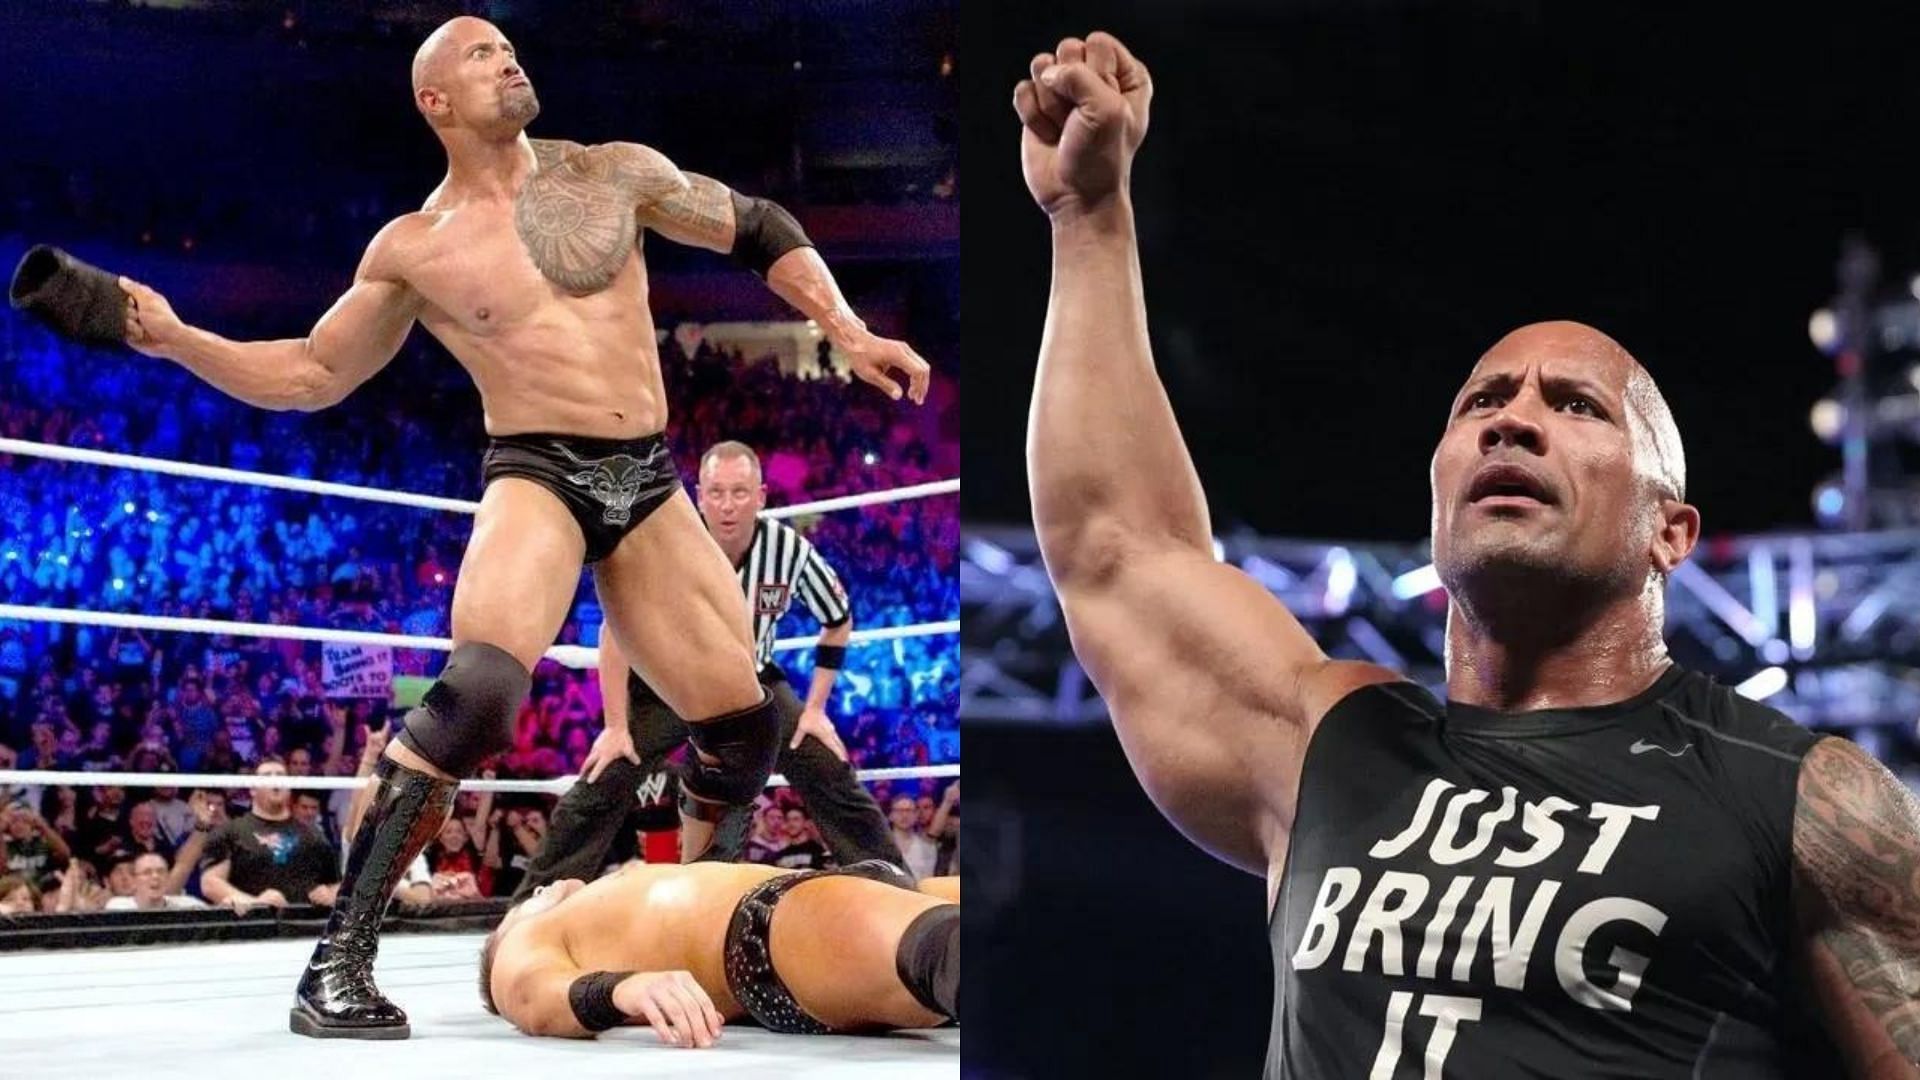 A WWE star attempted to hit one of The Rock